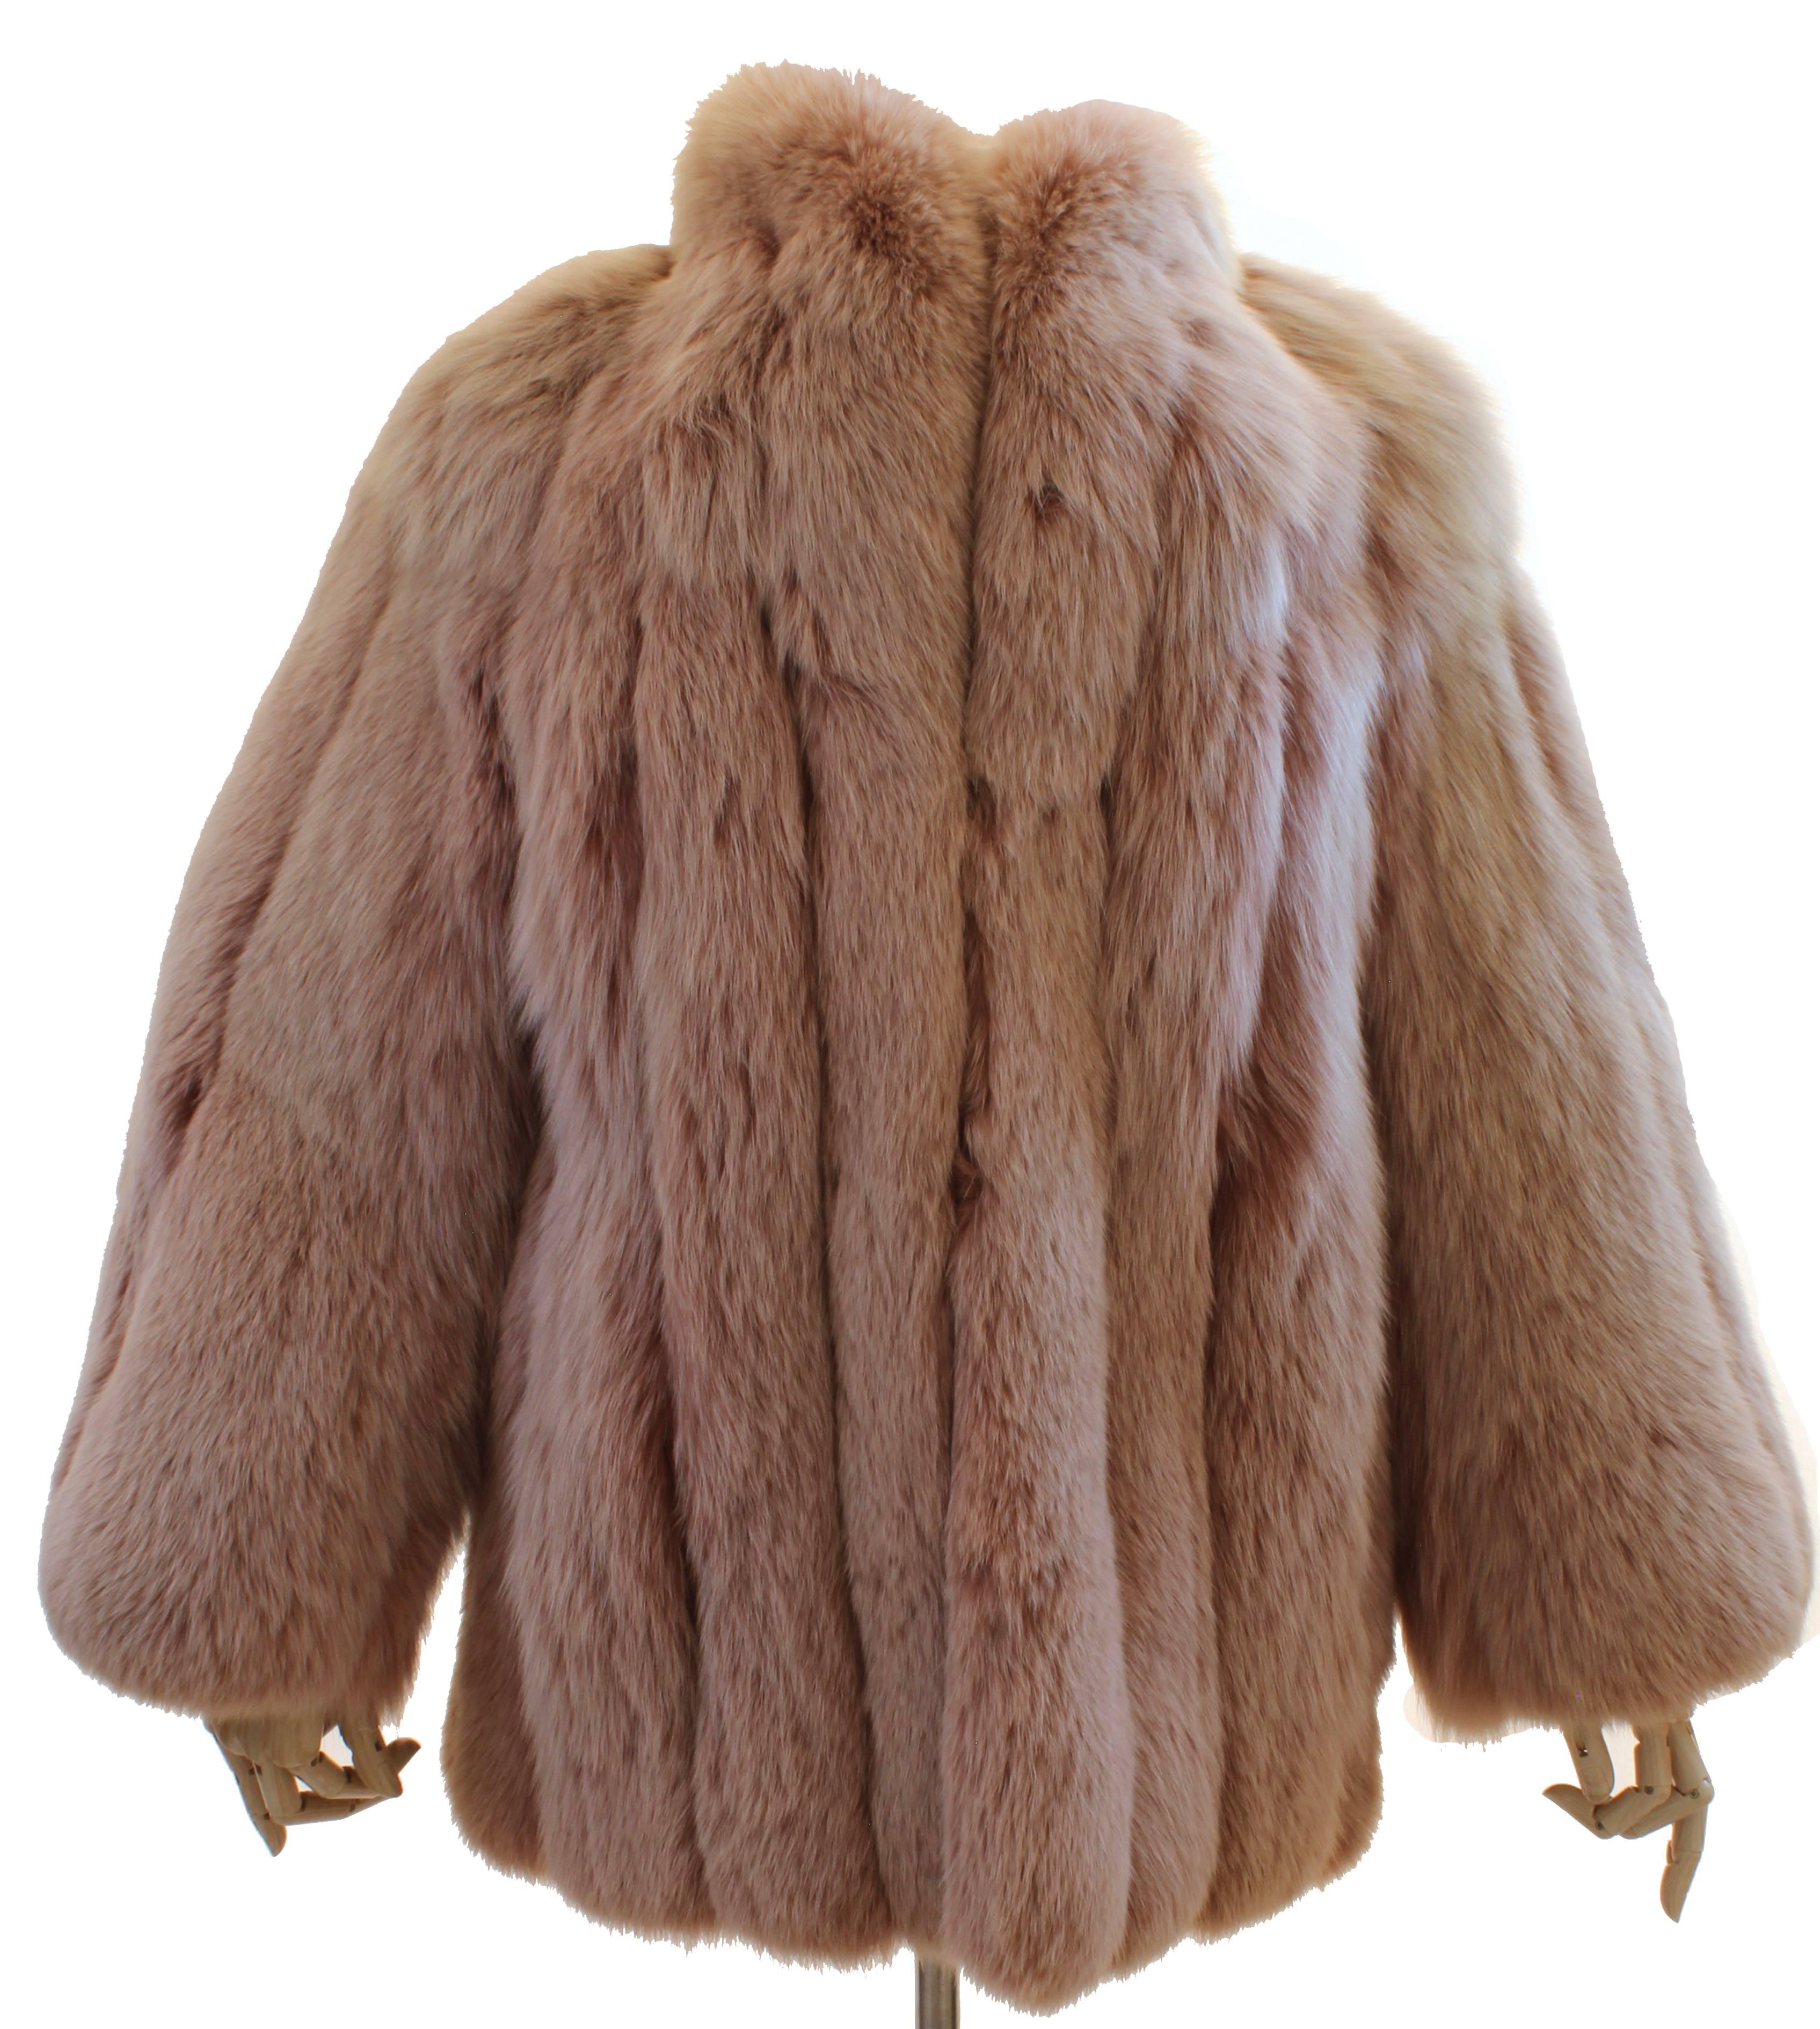 This fabulous fox fur coat is from Flah & Co Department Store, likely made in the 1970s.  Made from Fox fur, this piece has subtle tones of tan, pink and white throughout, giving it a chic look! In excellent condition for its age, the pelts are soft